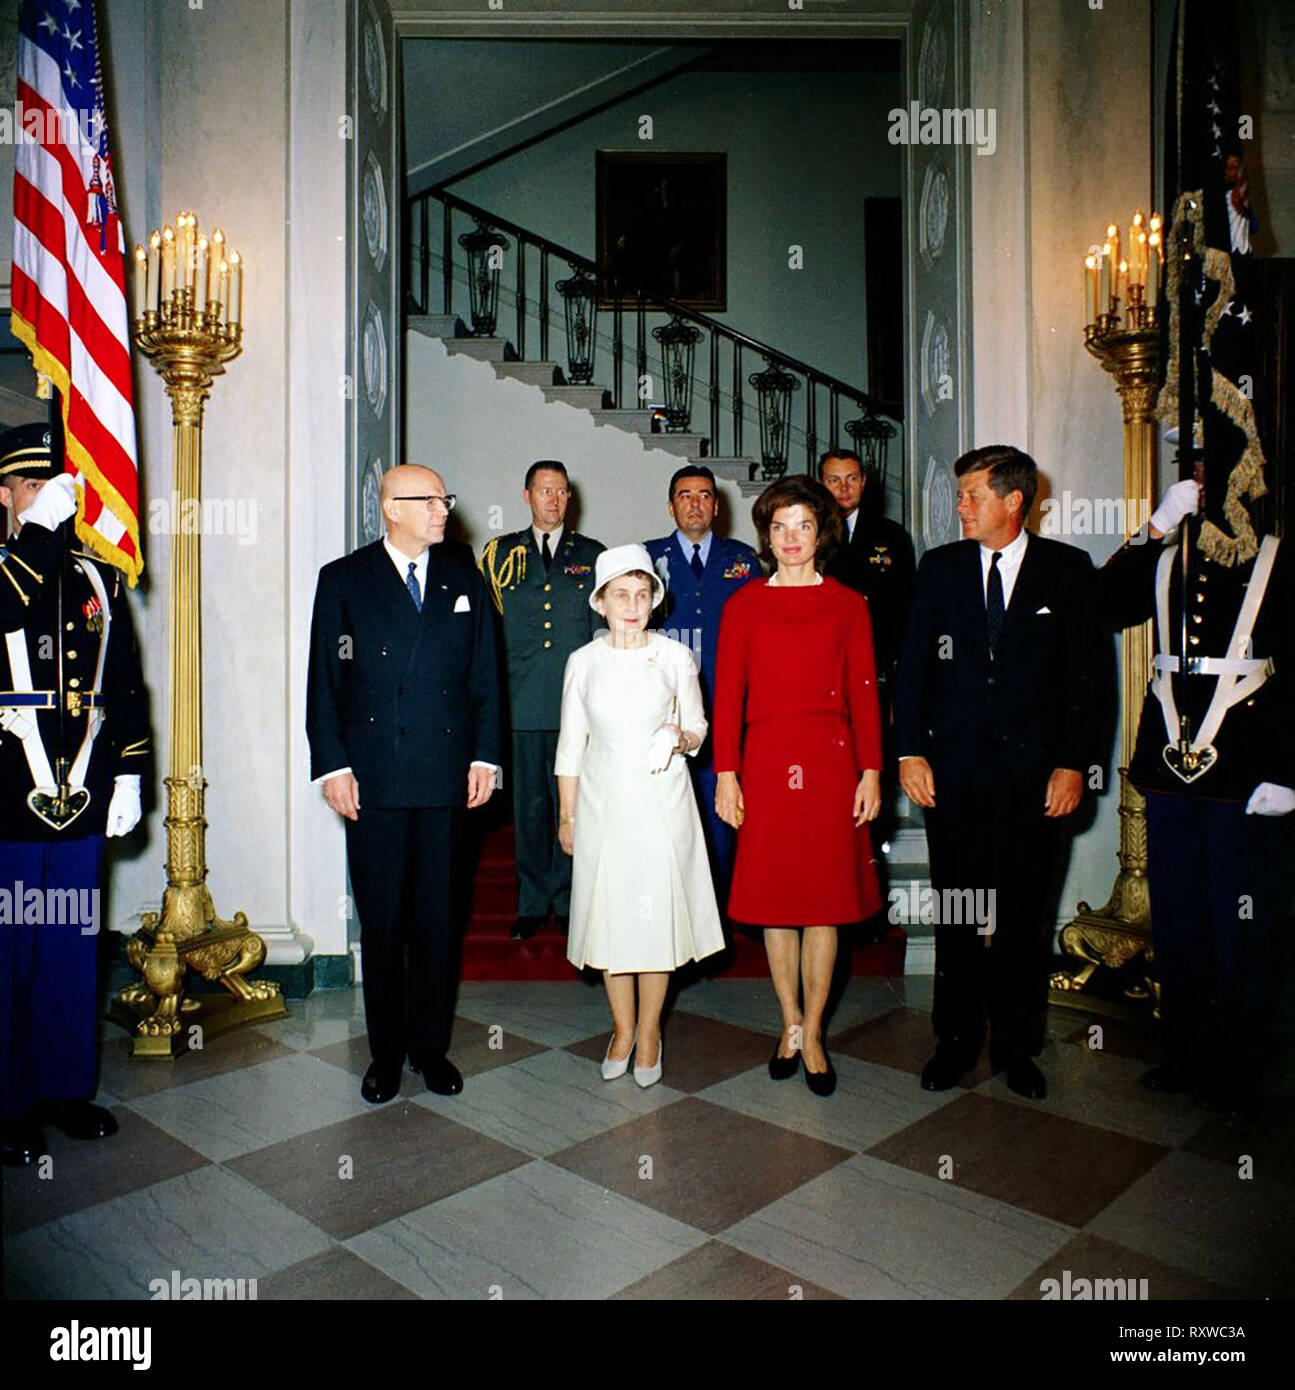 Luncheon in honor of Urho Kekkonen, President of Finland. Front row (L - R): President Kekkonen; Sylvi Kekkonen, wife of President Kekkonen; First Lady Jacqueline Kennedy; President John F. Kennedy. Second row (L - R): Military Aide to the President General Chester V. Clifton; Air Force Aide to the President Brigadier General Godfrey T. McHugh; Naval Aide to the President Captain Tazewell Shepard, Jr. Grand Staircase, Entrance Hall, White House, Washington, D.C., October 1961 Stock Photo